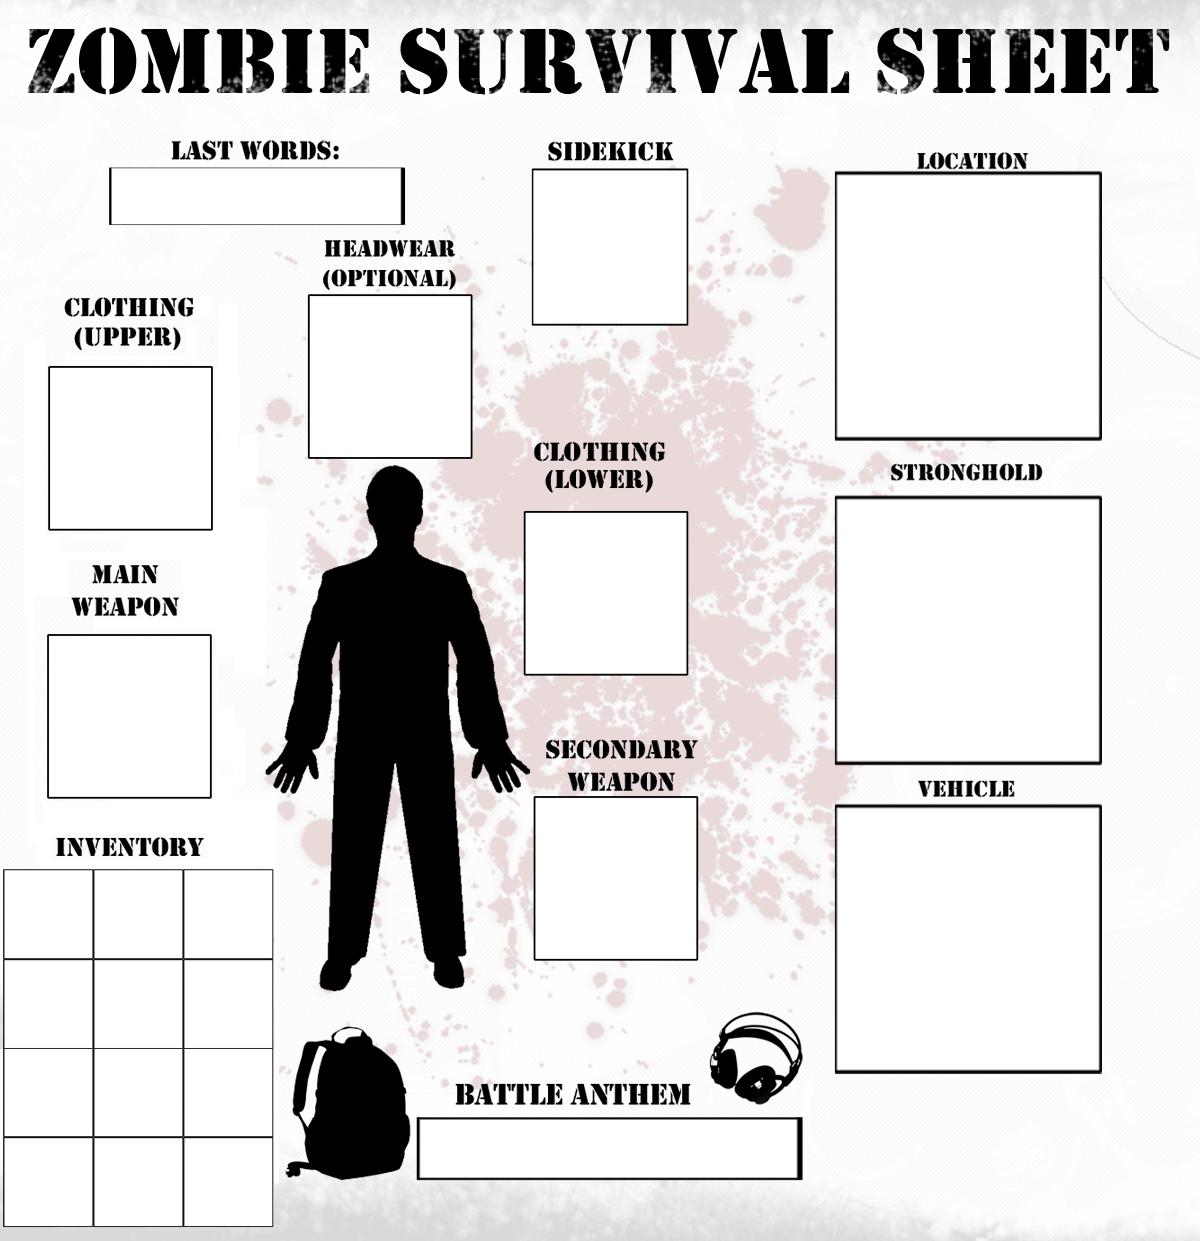 /dateien/uh61294,1268911386,Zombie Survival Sheet Template by MrAlf